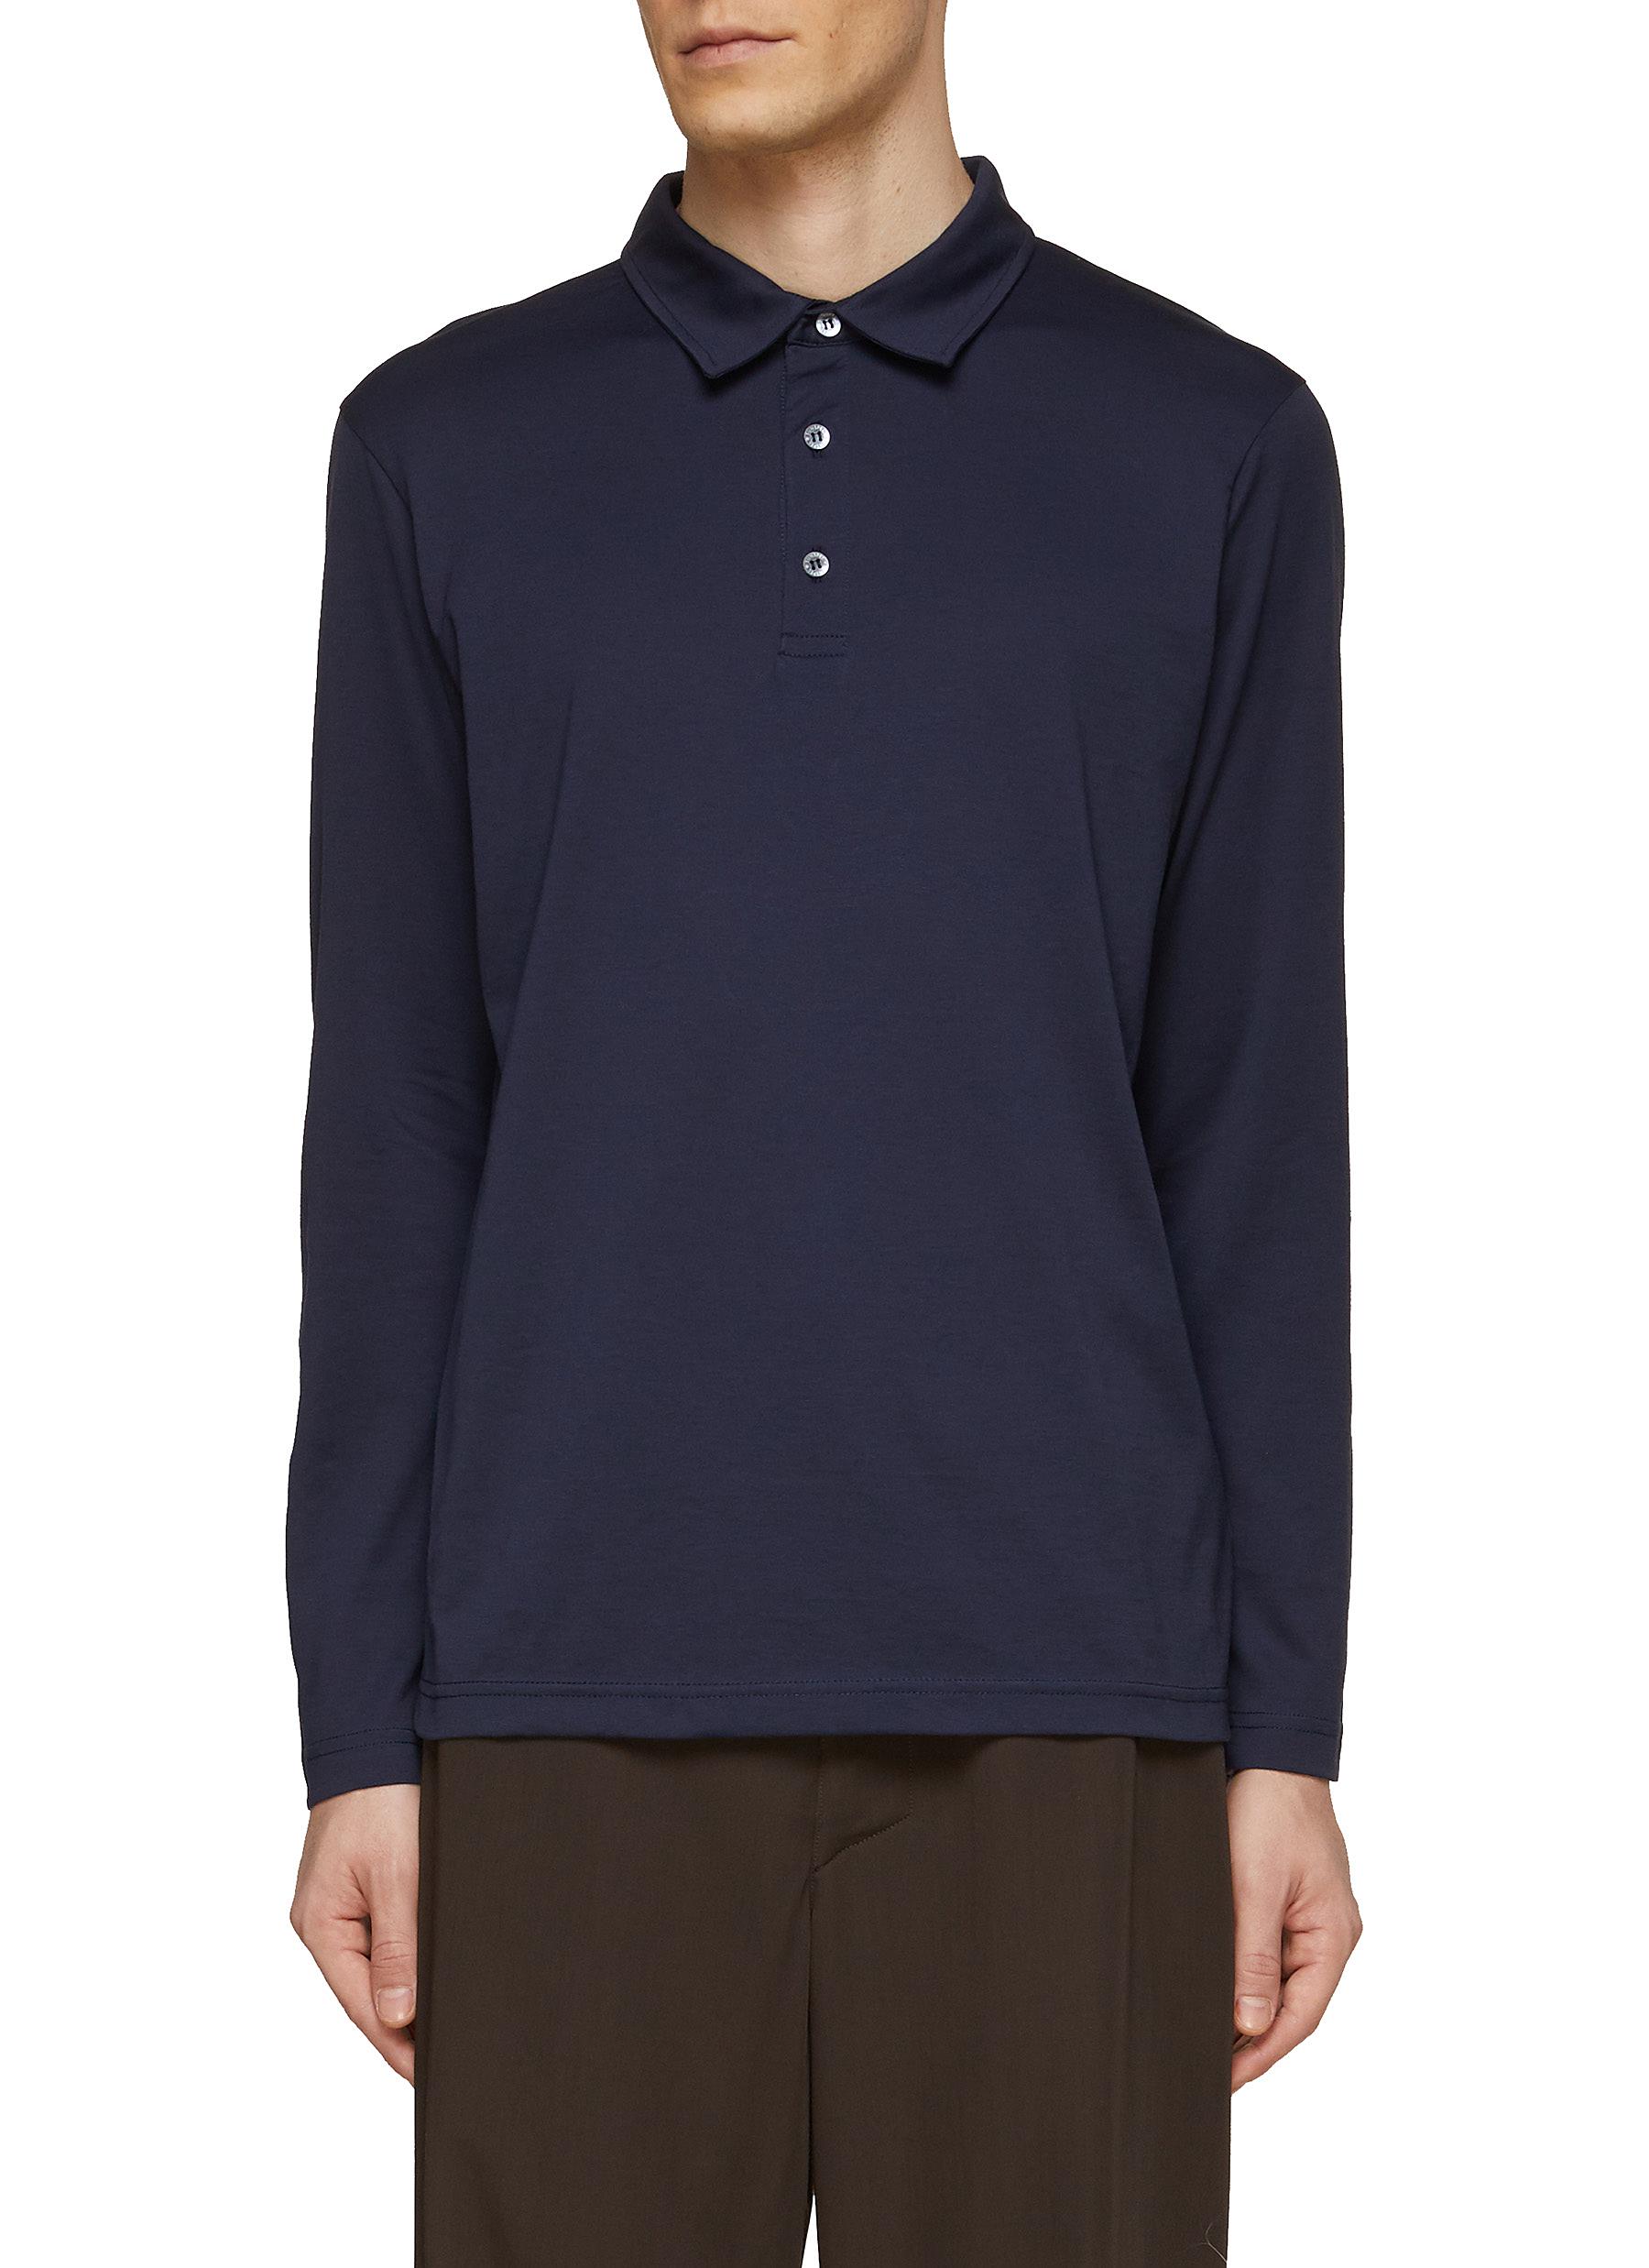 Polo Shirt White and Navy Blue Cotton Jersey